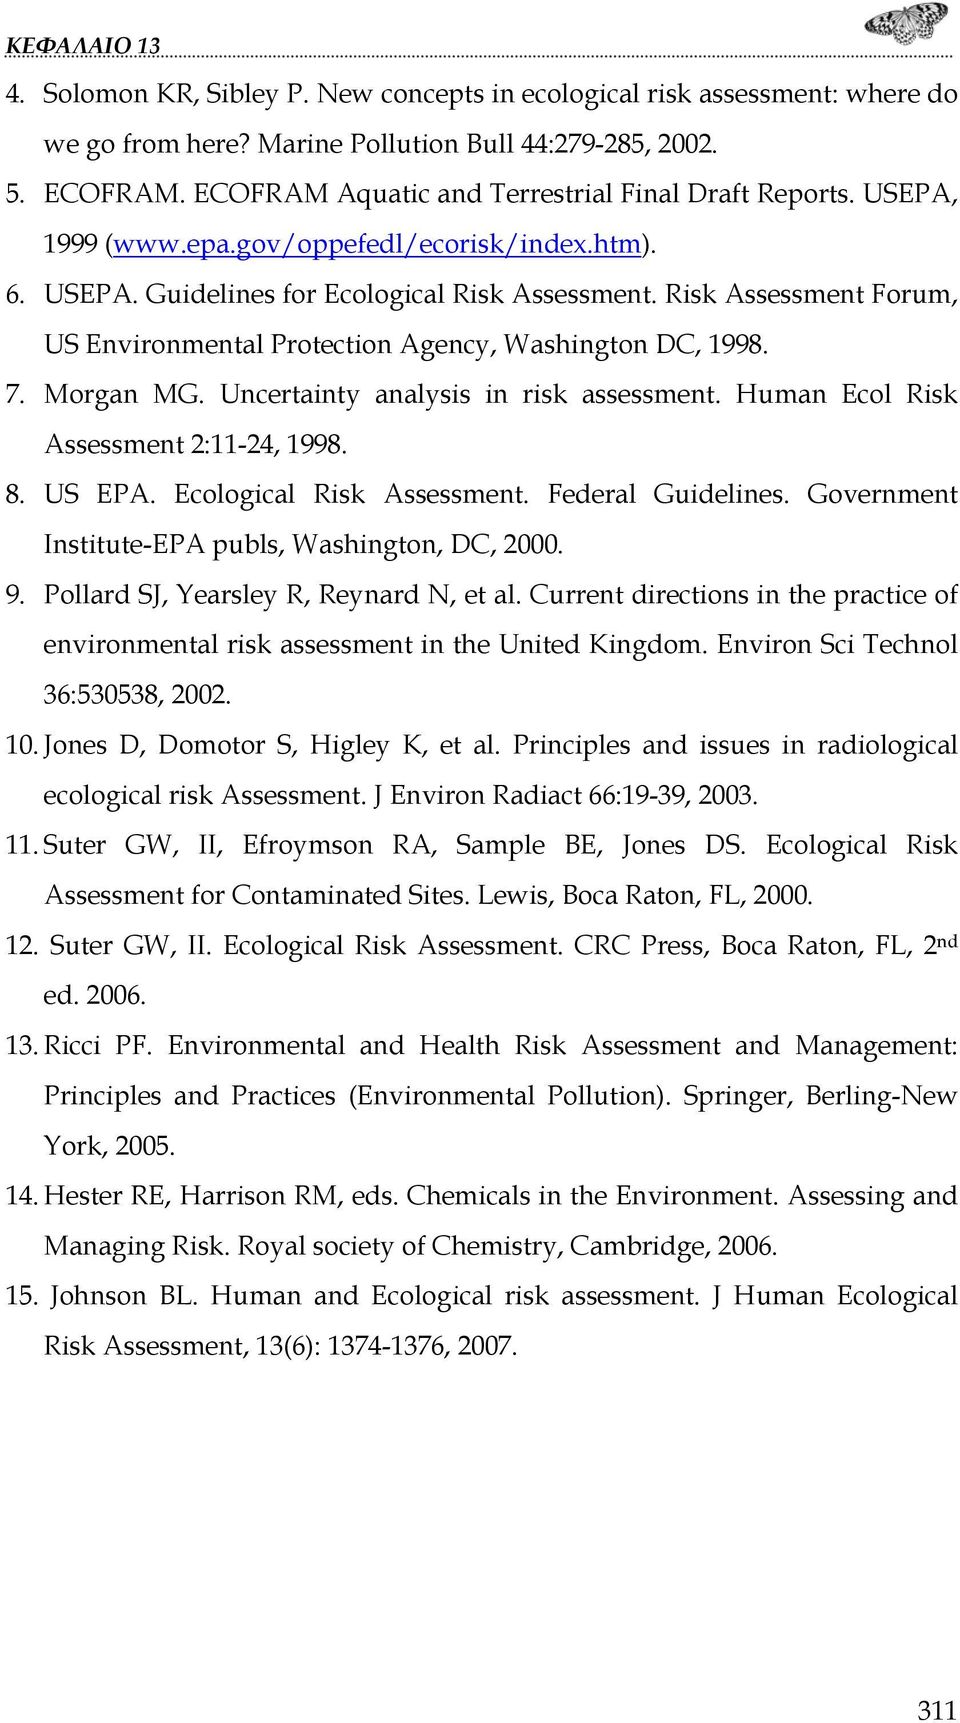 Uncertainty analysis in risk assessment. Human Ecol Risk Assessment 2:11-24, 1998. 8. US EPA. Ecological Risk Assessment. Federal Guidelines. Government Institute-EPA publs, Washington, DC, 2000. 9.